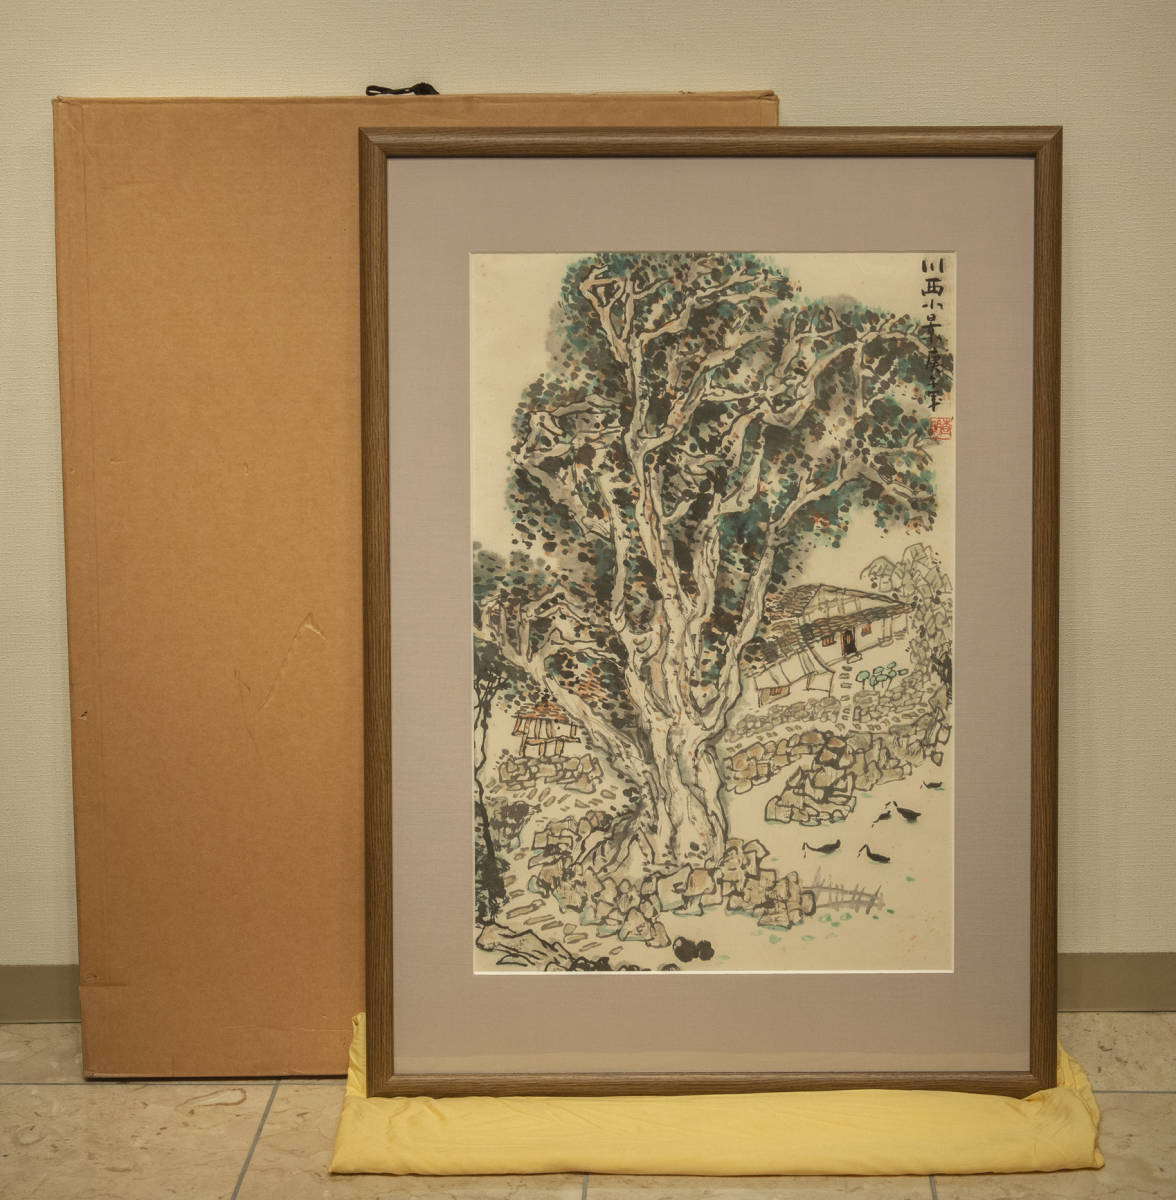 &#26597; Akira 1990 year work river west small . frame genuine work China picture 